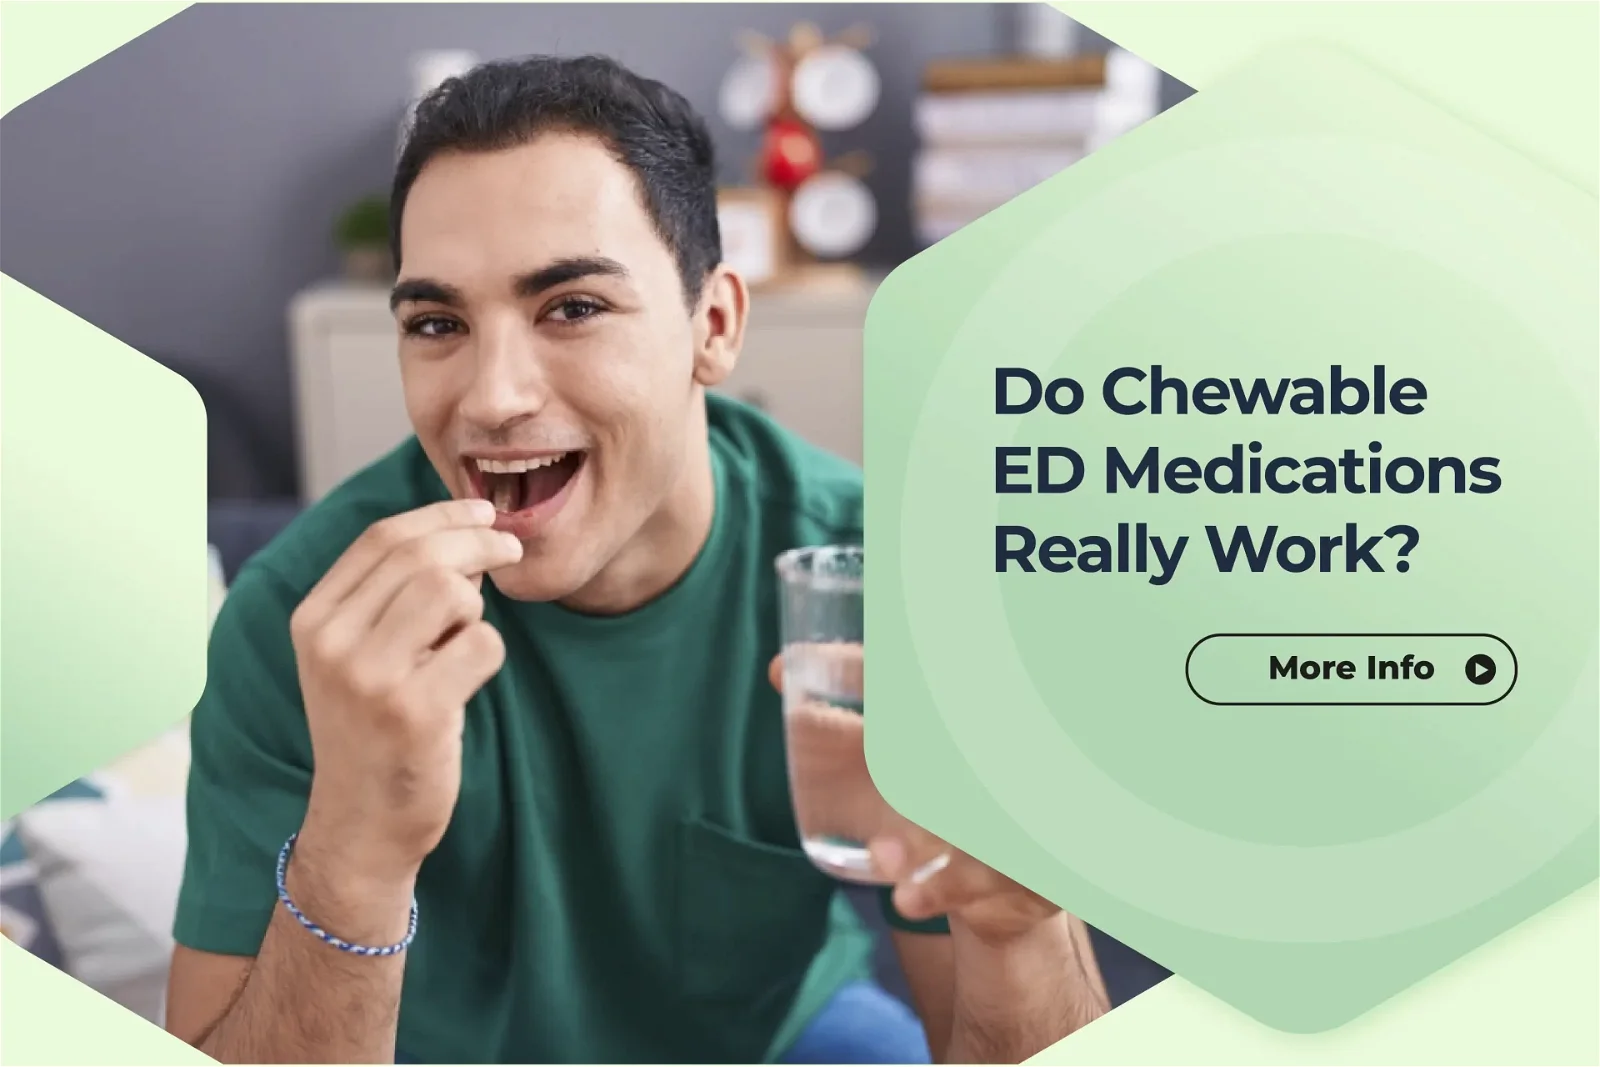 Do chewable ED medications really work